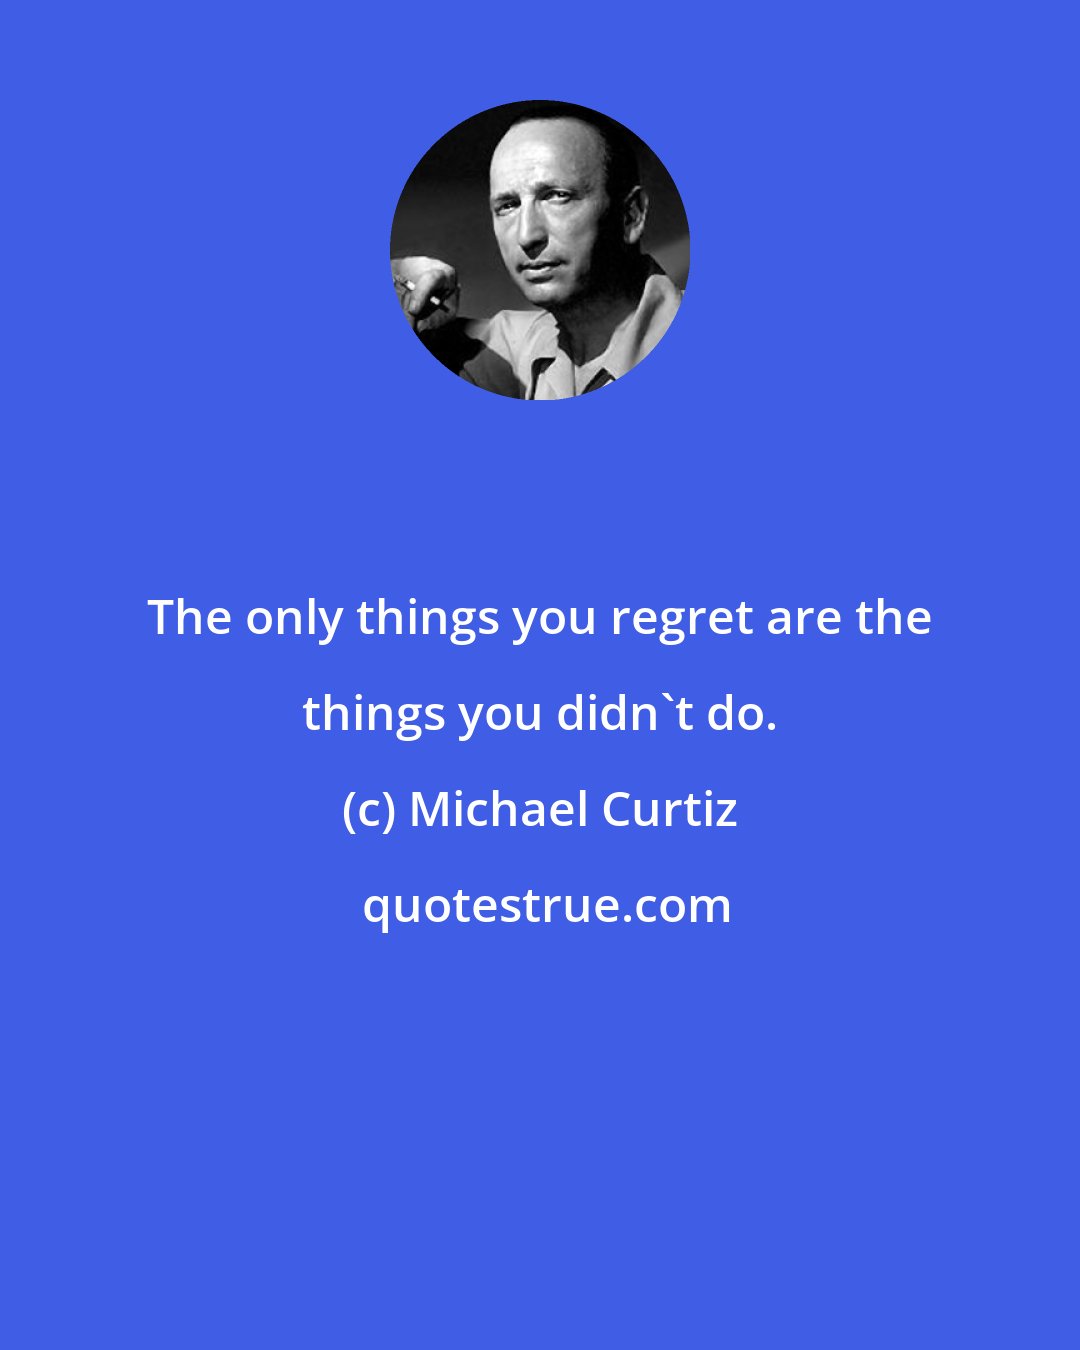 Michael Curtiz: The only things you regret are the things you didn't do.